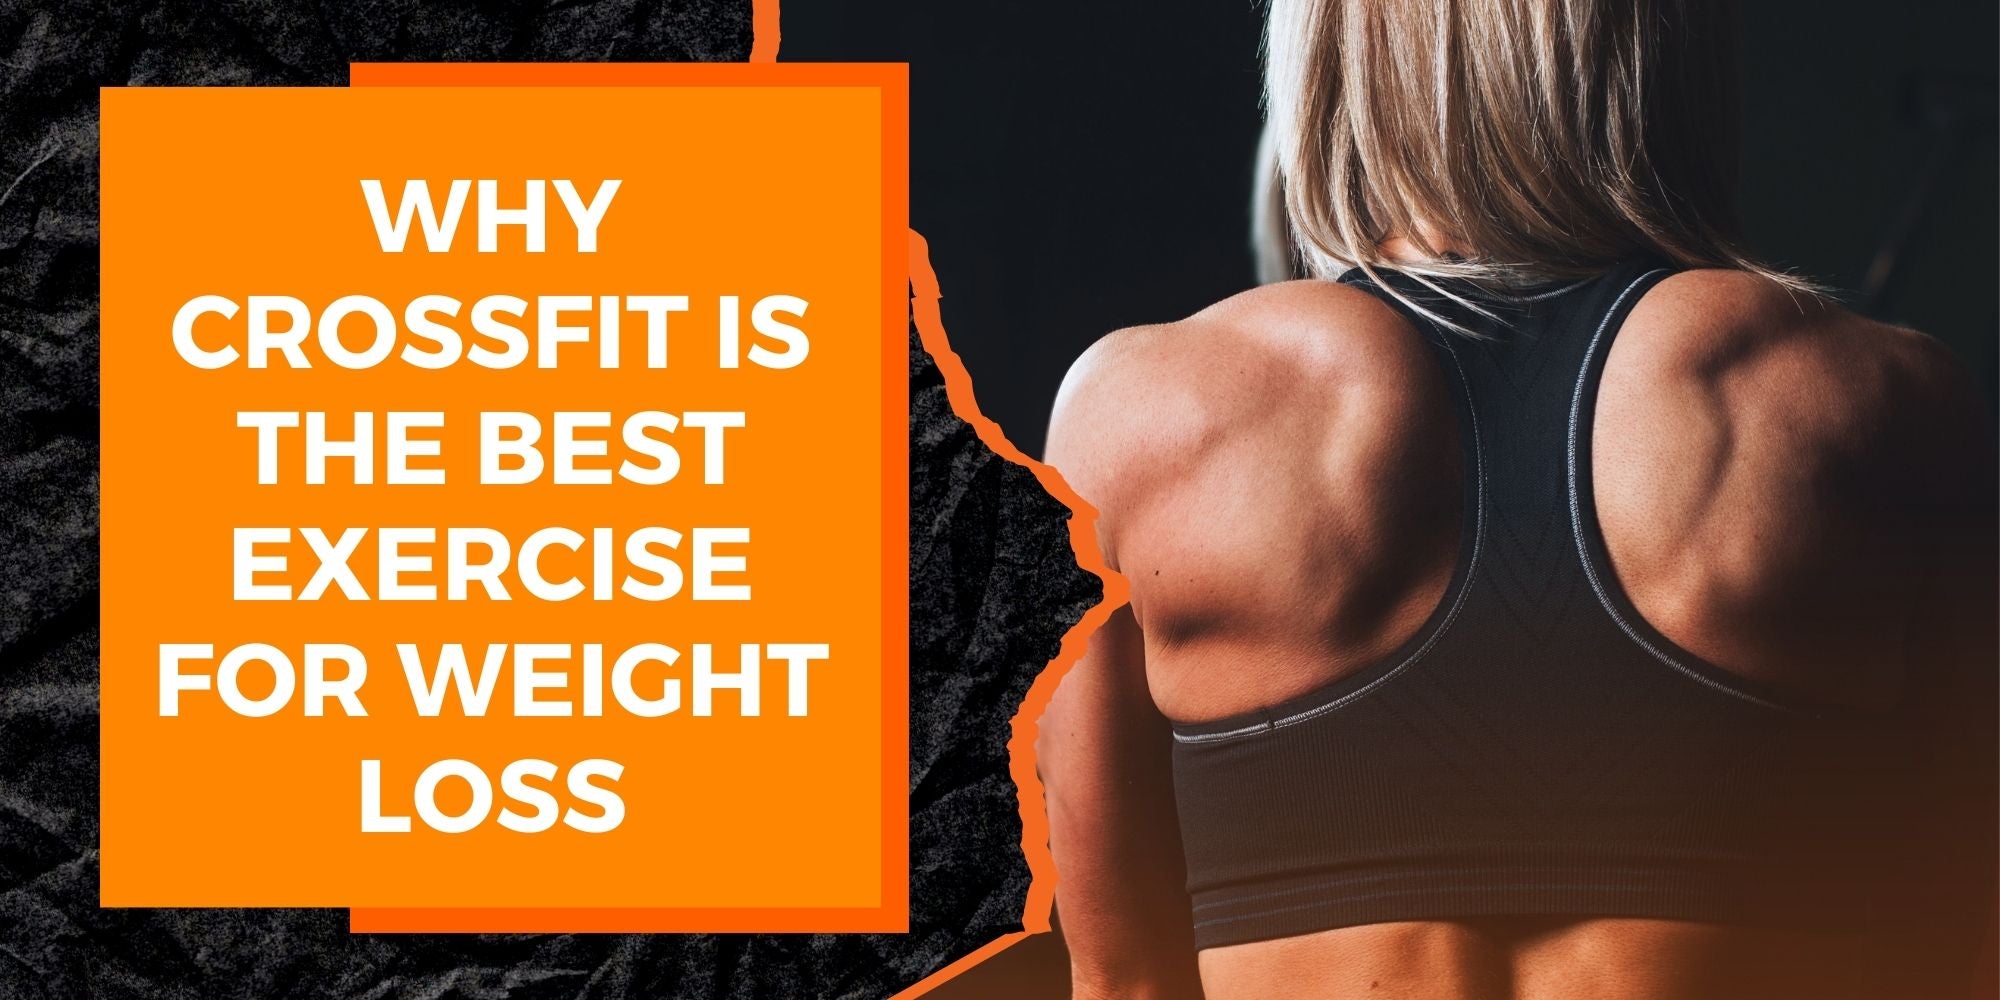 Why CrossFit is the Best Exercise for Weight Loss